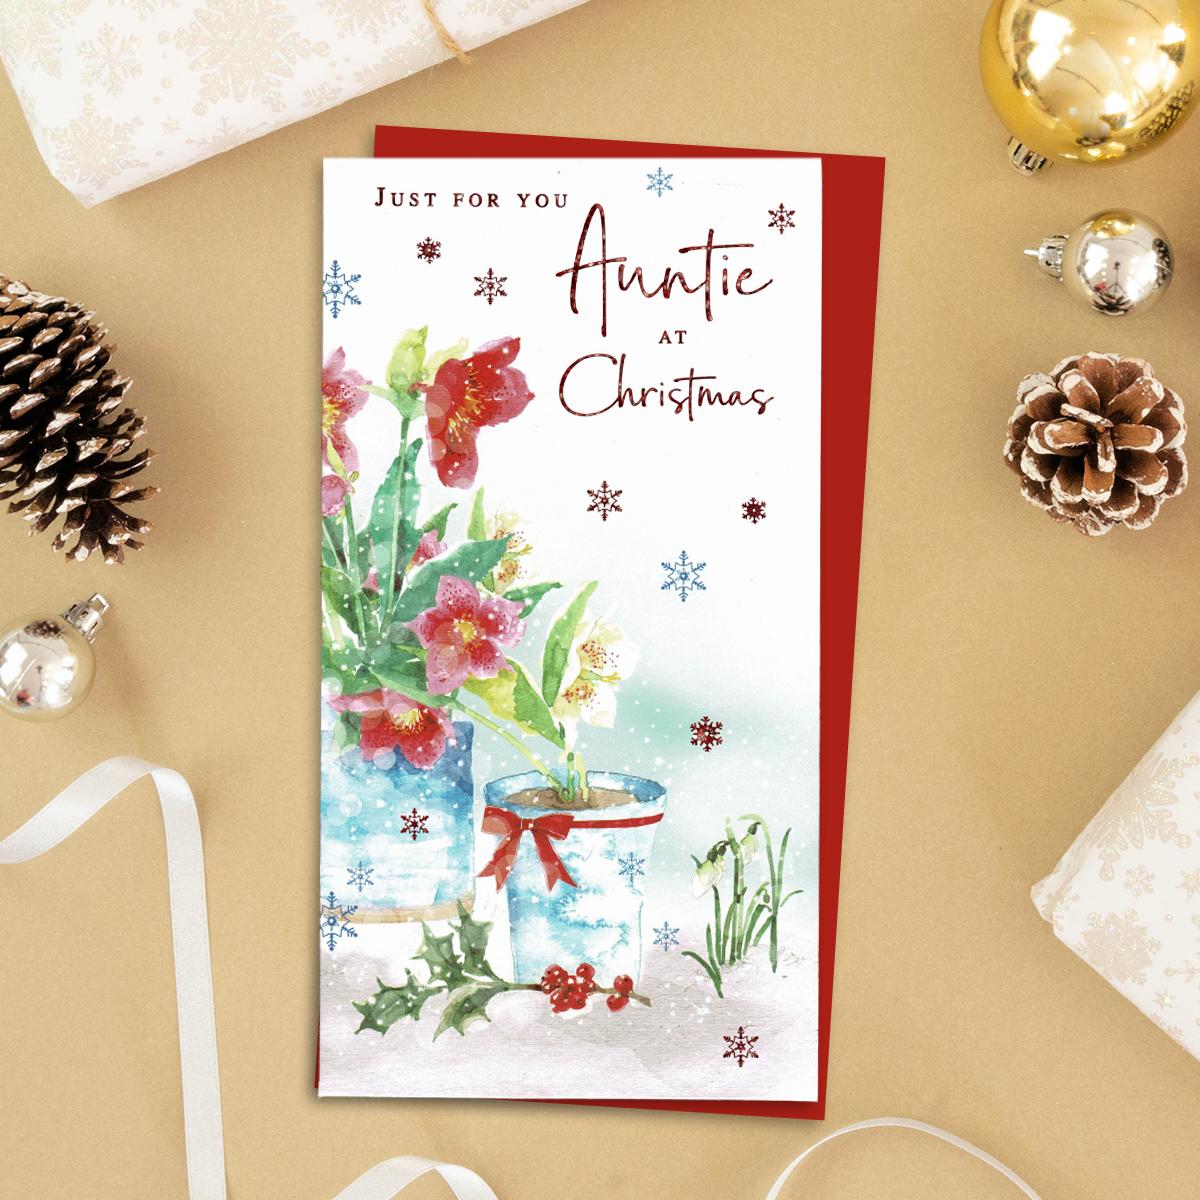 Just For You Auntie At Christmas Featuring Flowering Plants And Snowdrops. Finished With Red Foil Detail And Red Envelope